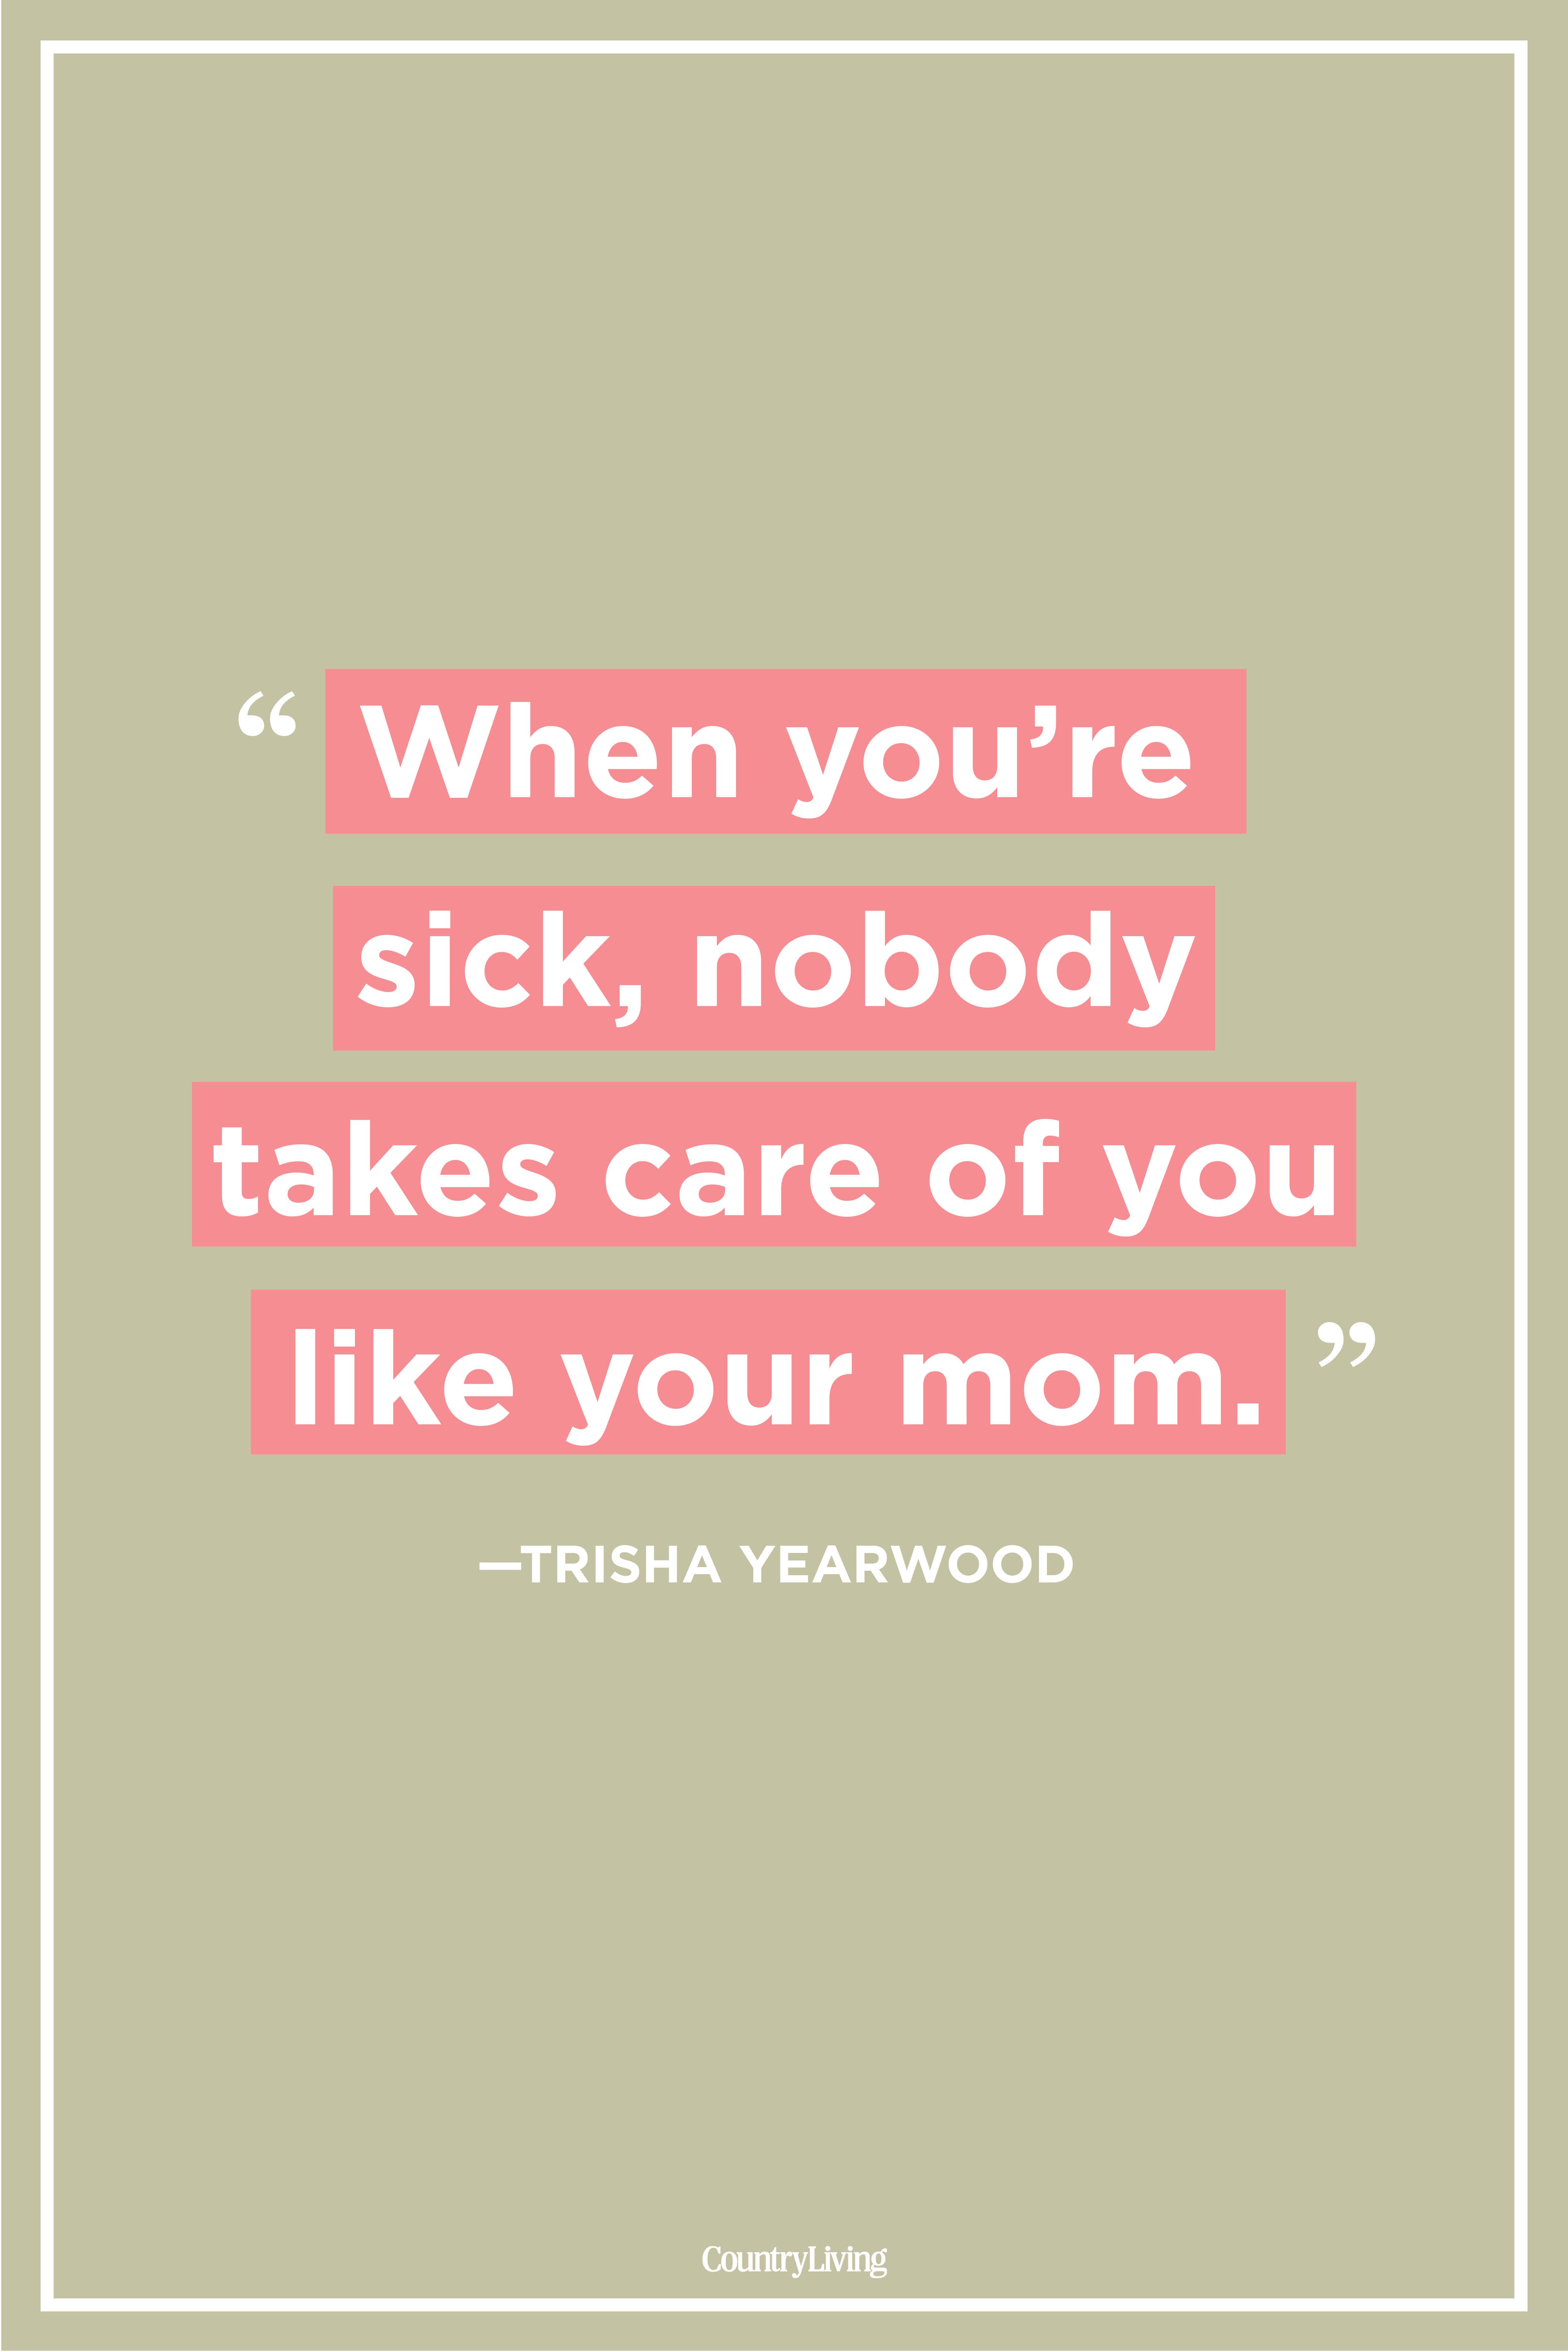 Inspirational Quote For Sick Child - Inspirational Quotes for Sick Kids ...